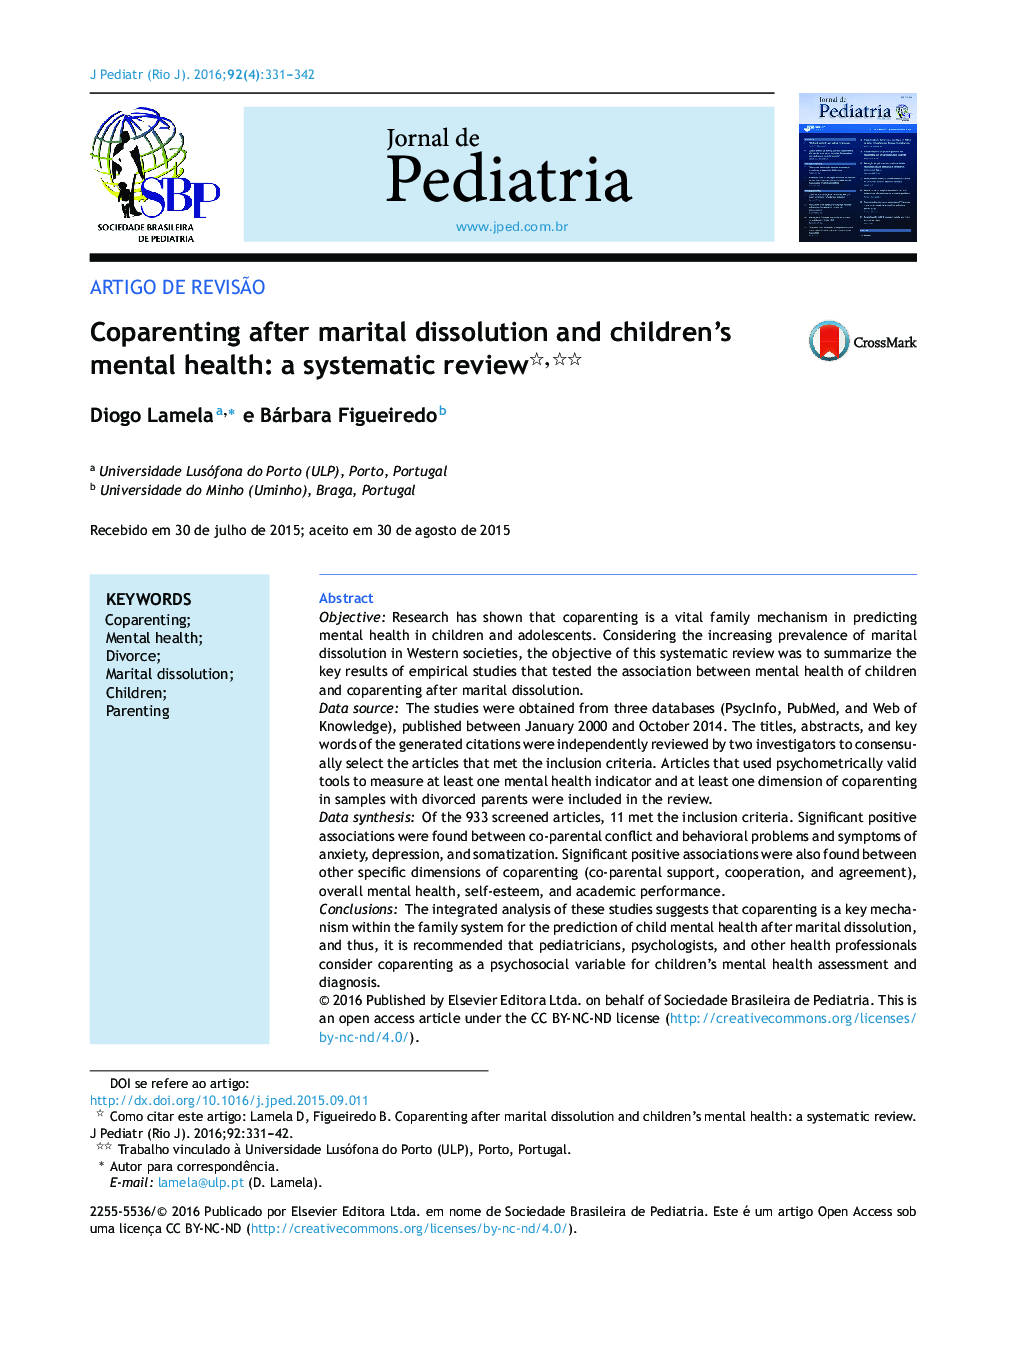 Coparenting after marital dissolution and children's mental health: a systematic review 